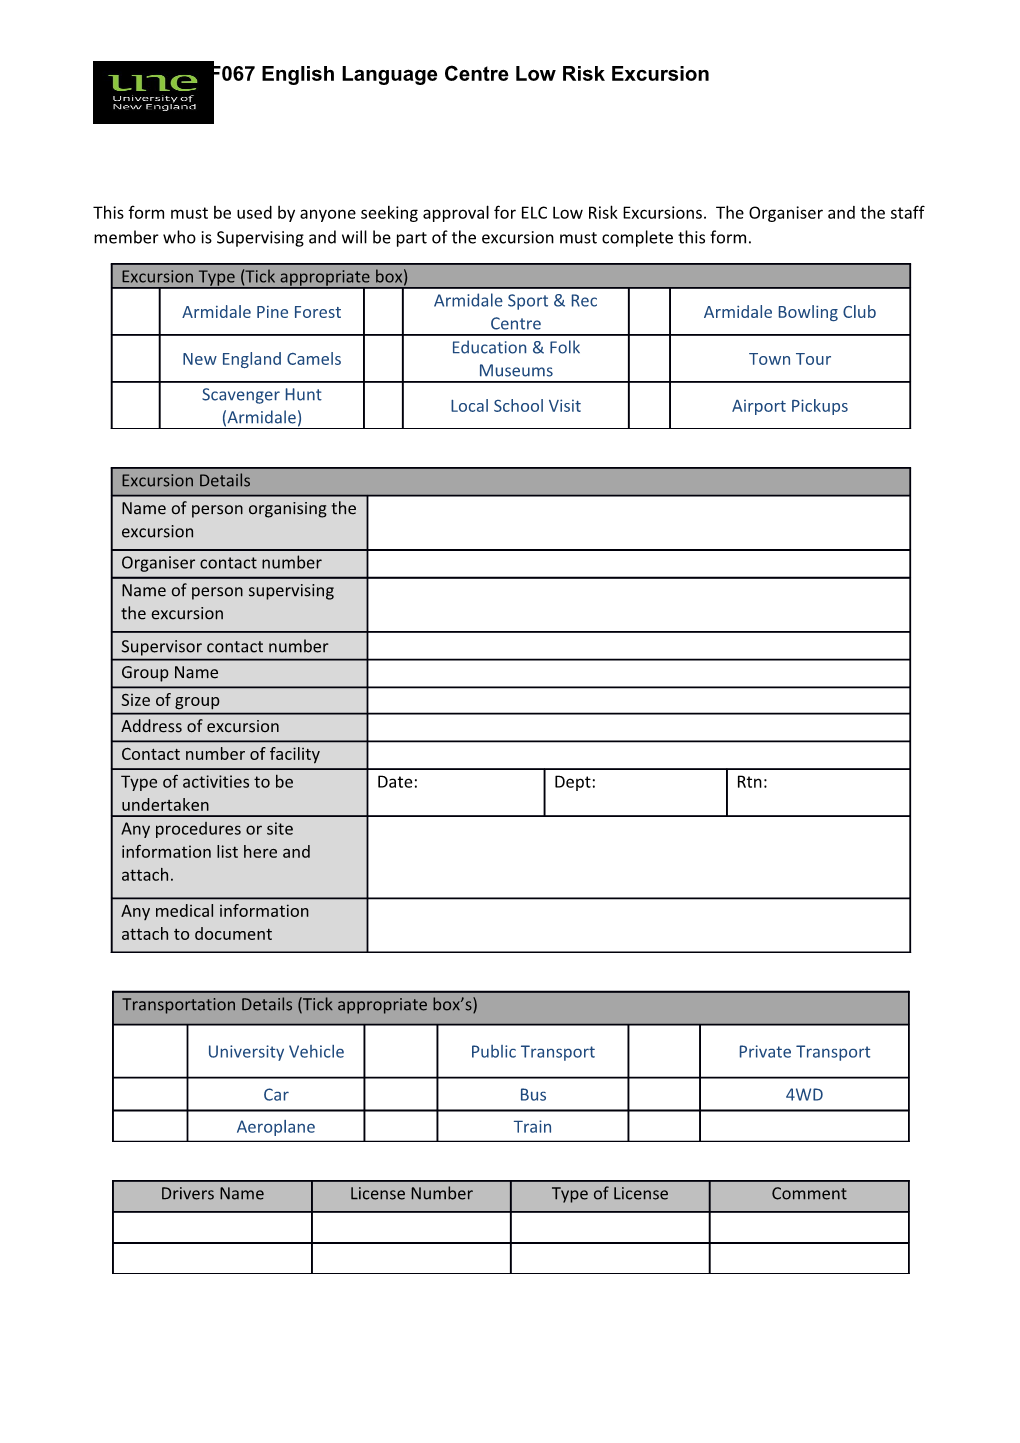 Attached Forms/Booking Numbers